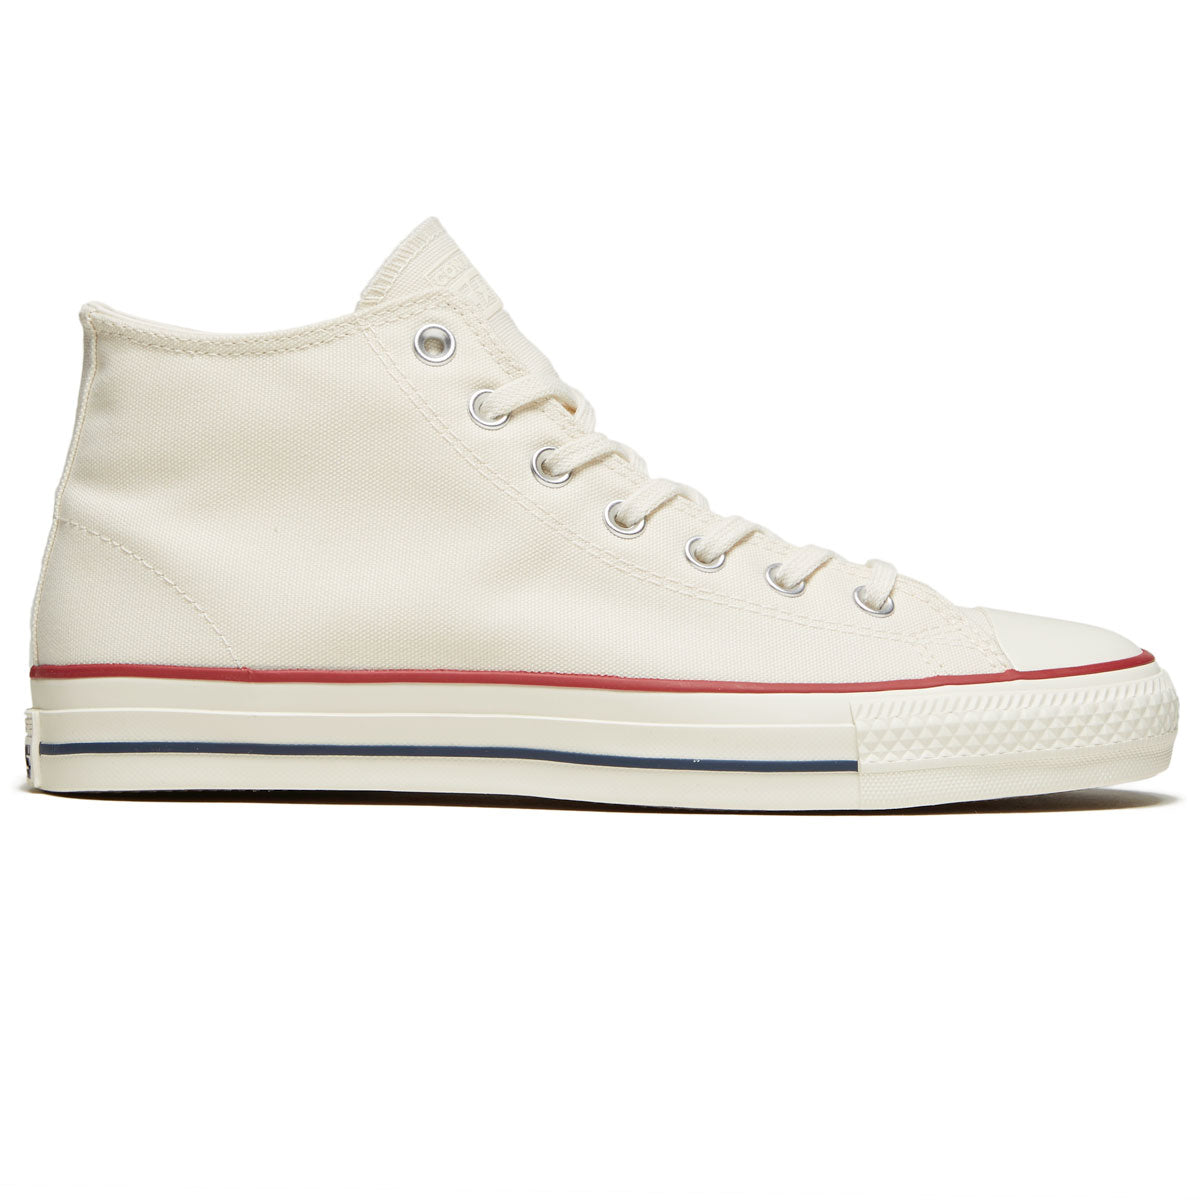 Converse Chuck Taylor All Star Pro Mid Shoes - Egret/Red/Clematis Blue image 1